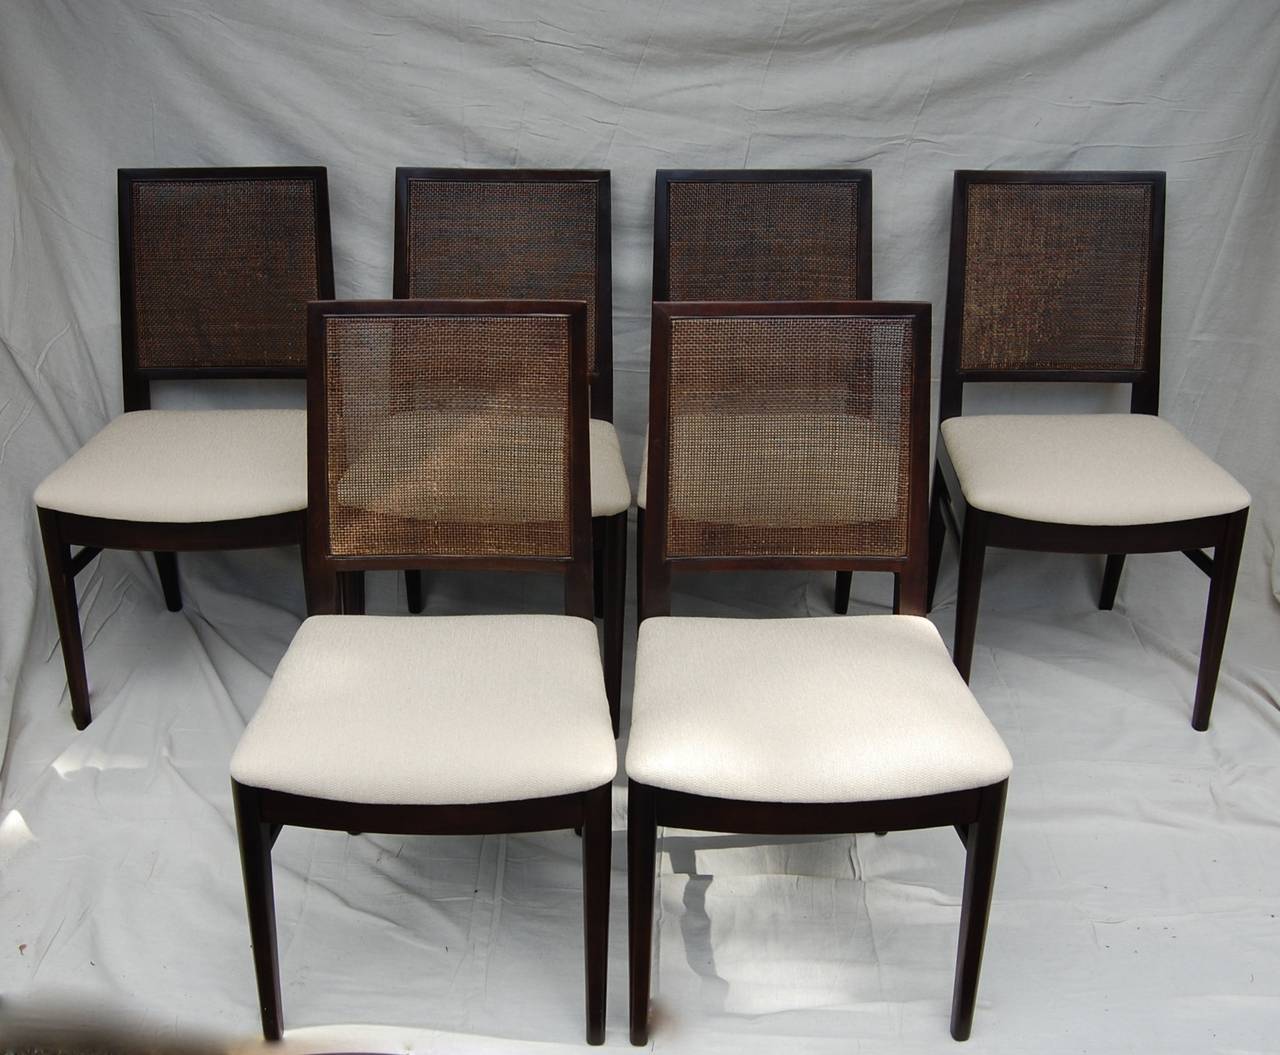 Set of 8 John Stuart Ebonized Walnut Dining Chairs.  Two Armed Chairs and 6 Armless.  Original caning in excellent vintage condition.  Newly upholstered in fine neutral cotton linen woven fabric.  Host chairs measure 21